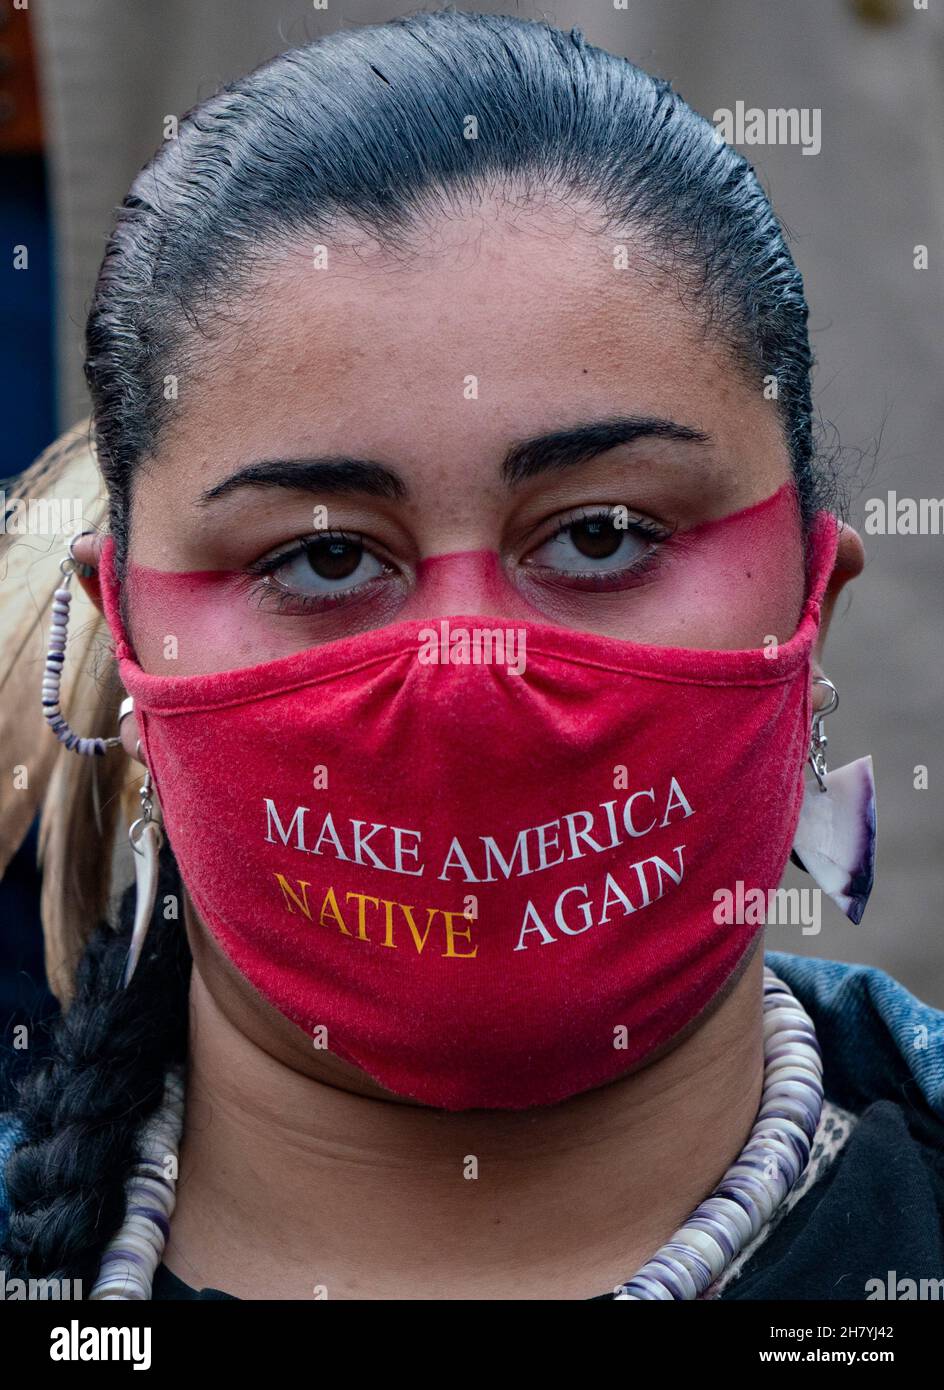 November 25, 2021, Plymouth, Massachusetts, USA: A demonstrators wearing Make America Native Again face mask, rallies to commemorate a National Day of Mourning at downtown Plymouth. A red handprint is a symbol that is used to indicate solidarity with missing and murdered Indigenous women and girls in North America. More than thousand people rally to commemorate a National Day of Mourning in Plymouth. More than thousand demonstrators rally to commemorate a National Day of Mourning organized by the United American Indians of New England n Thanksgiving Day. It's the 52nd year that the Uni Stock Photo